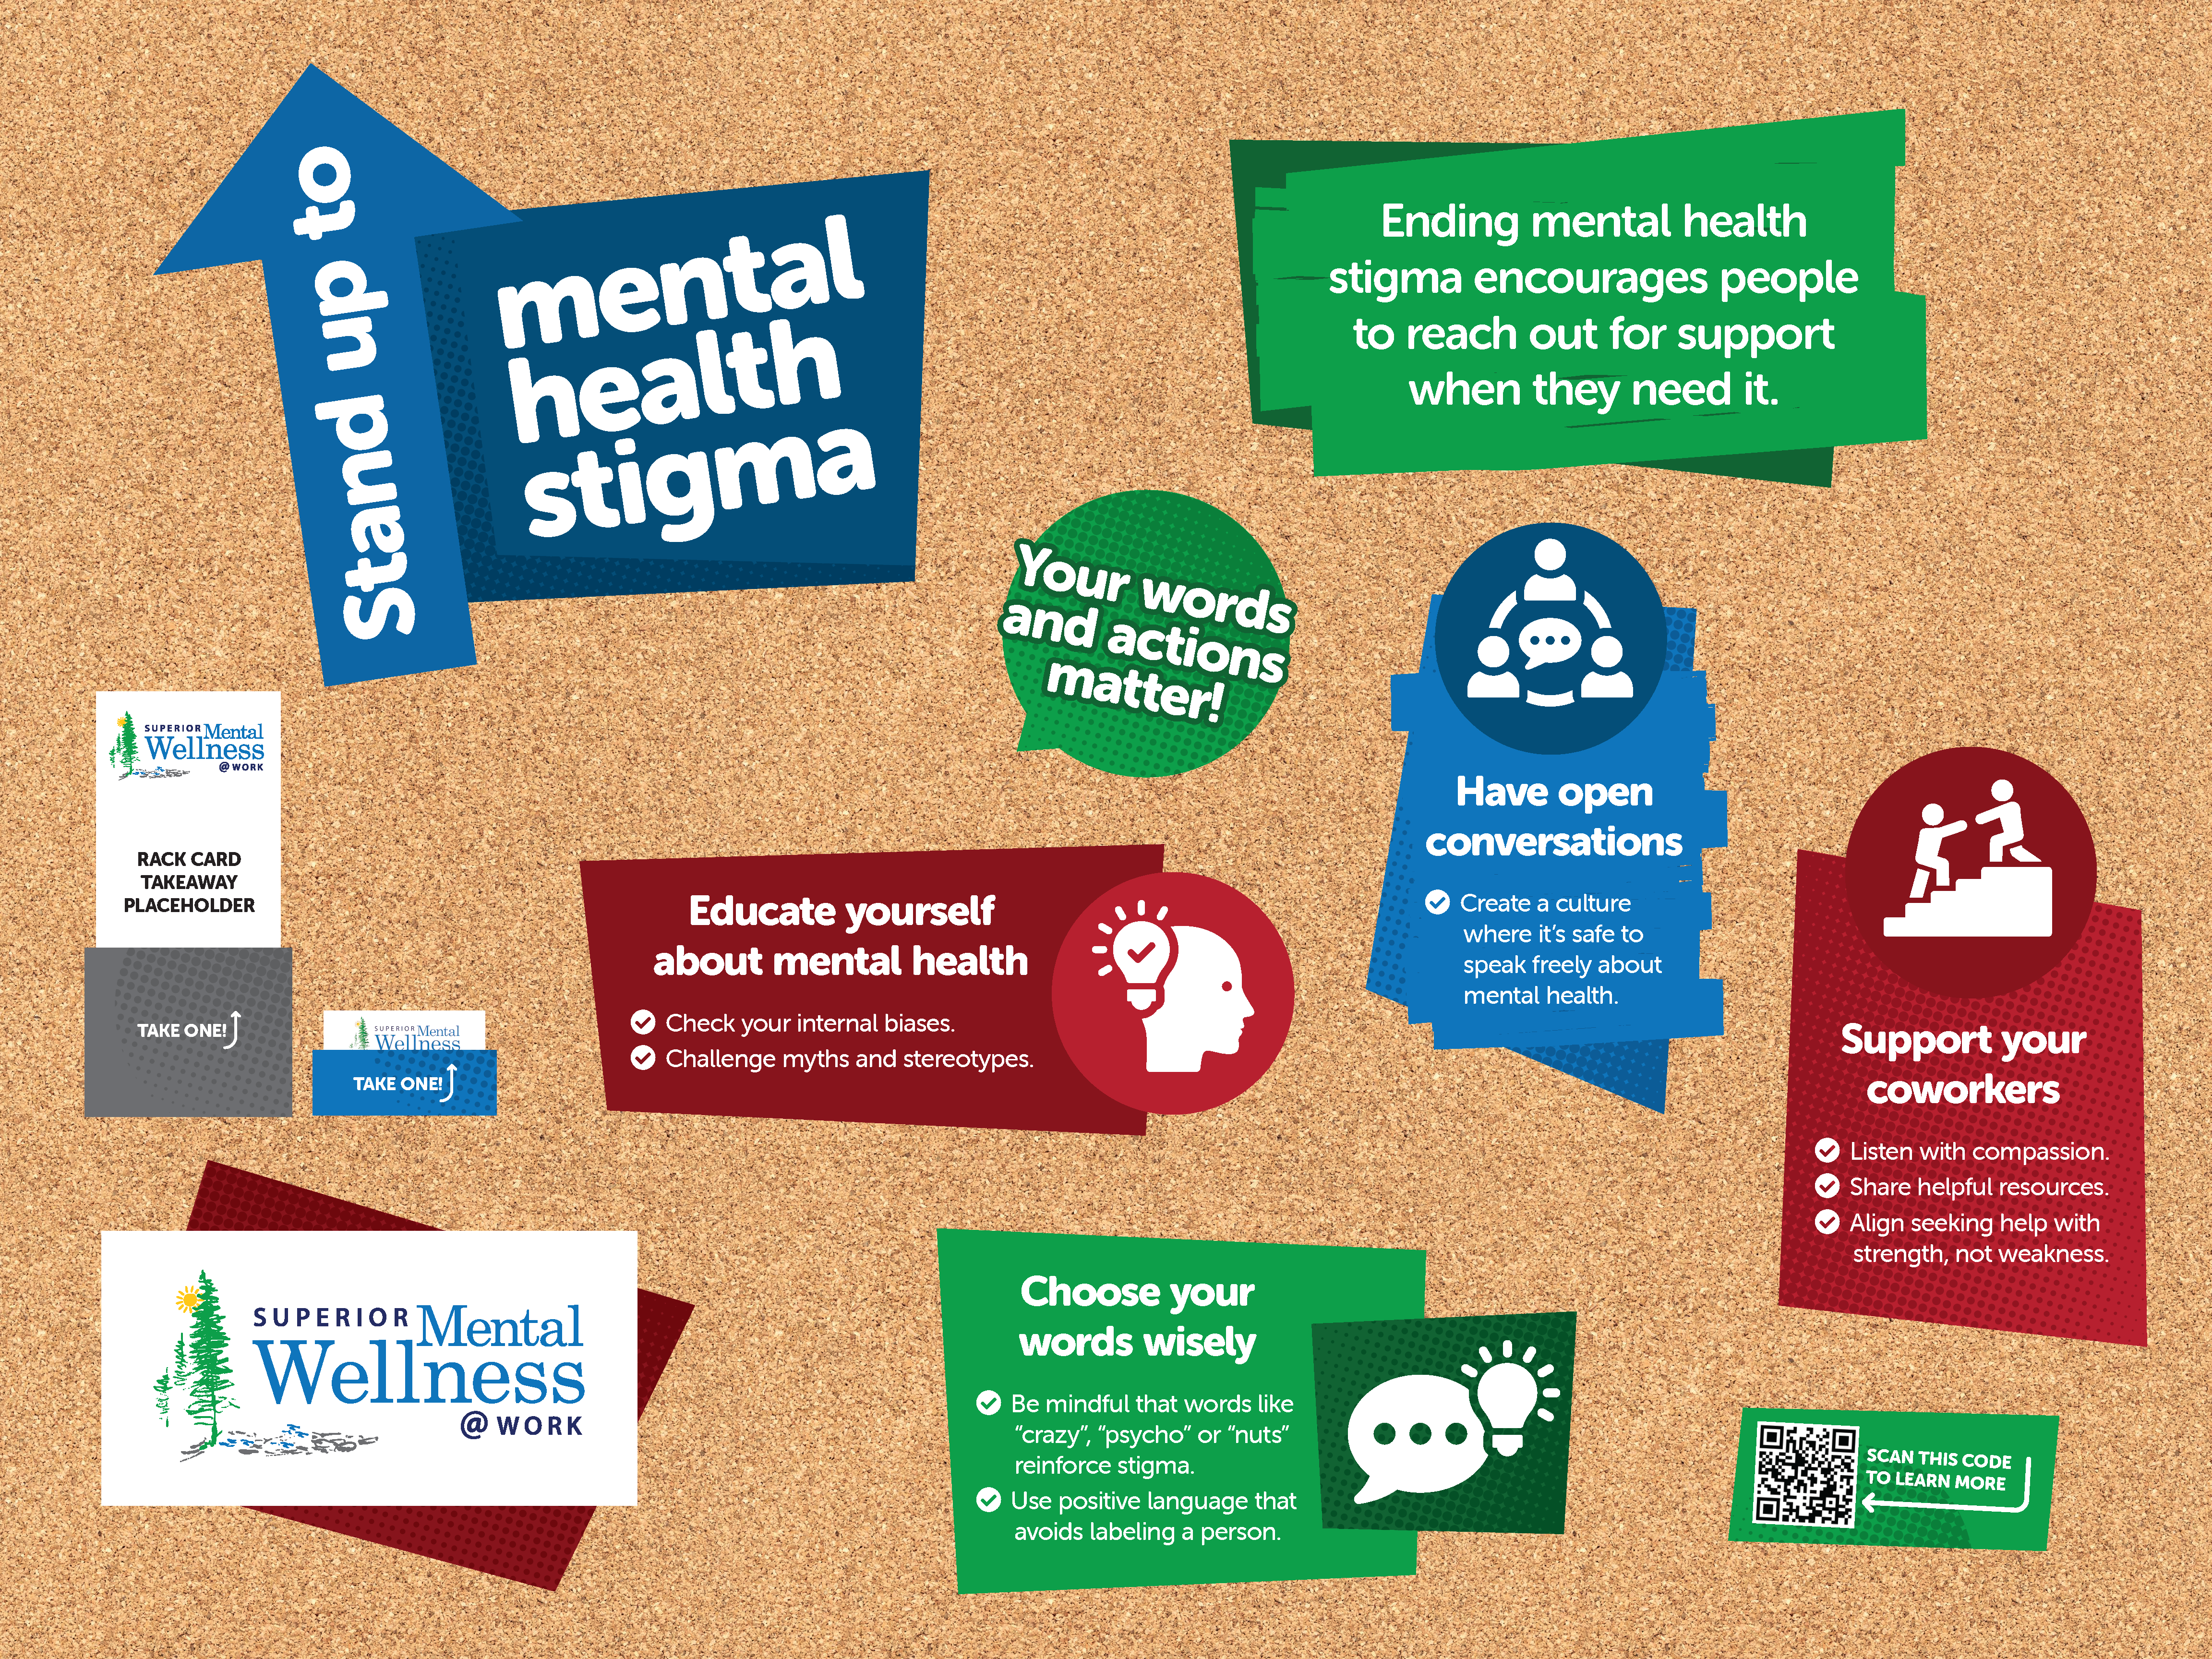 A bulletin board images with different tips to reduce mental health stigma at work